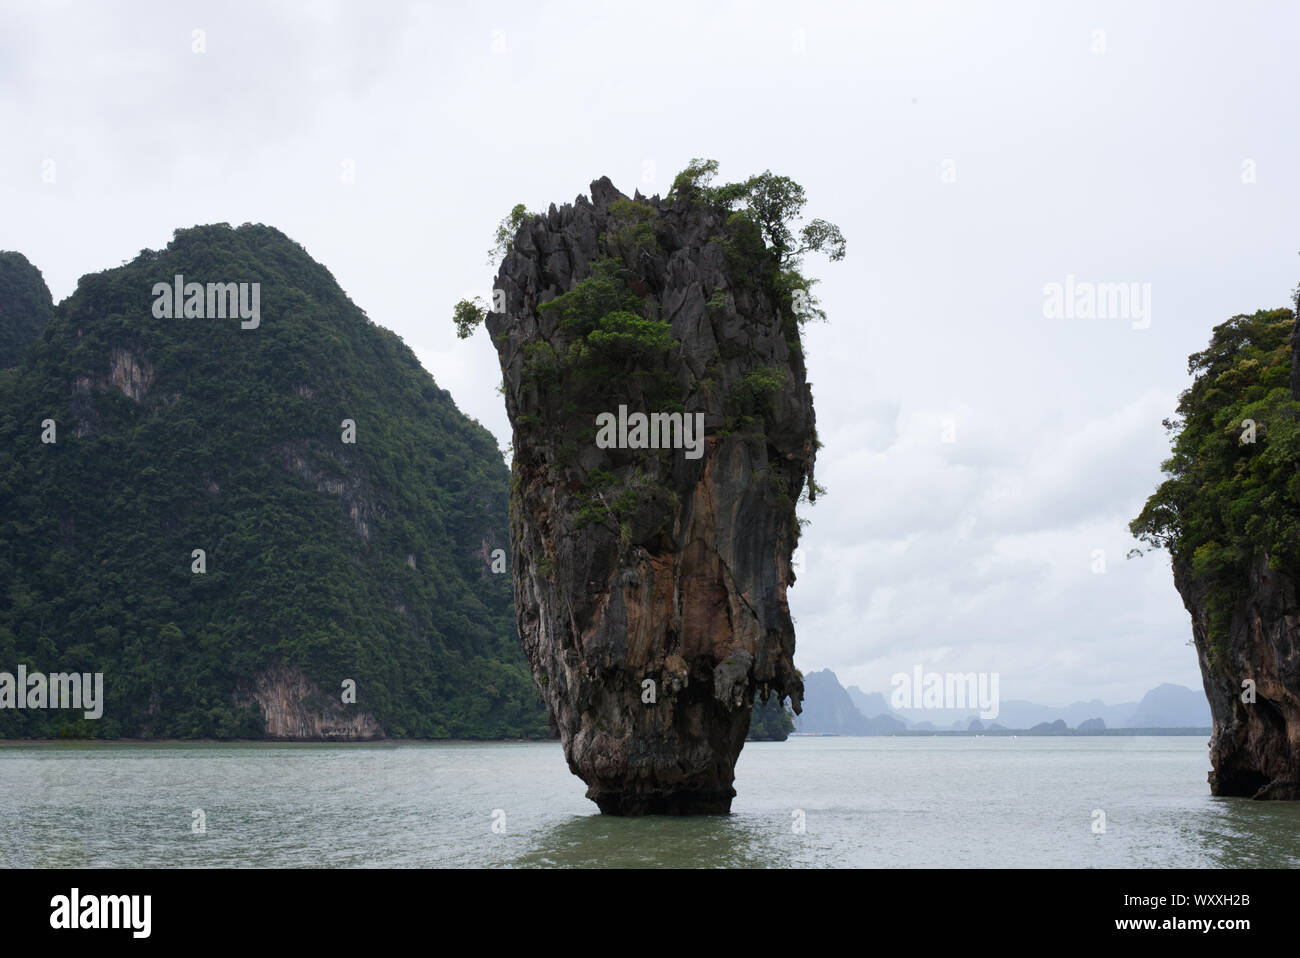 James Bond Island that was made famous from the 1974 James Bond movie The Man with the Golden Gun. Stock Photo